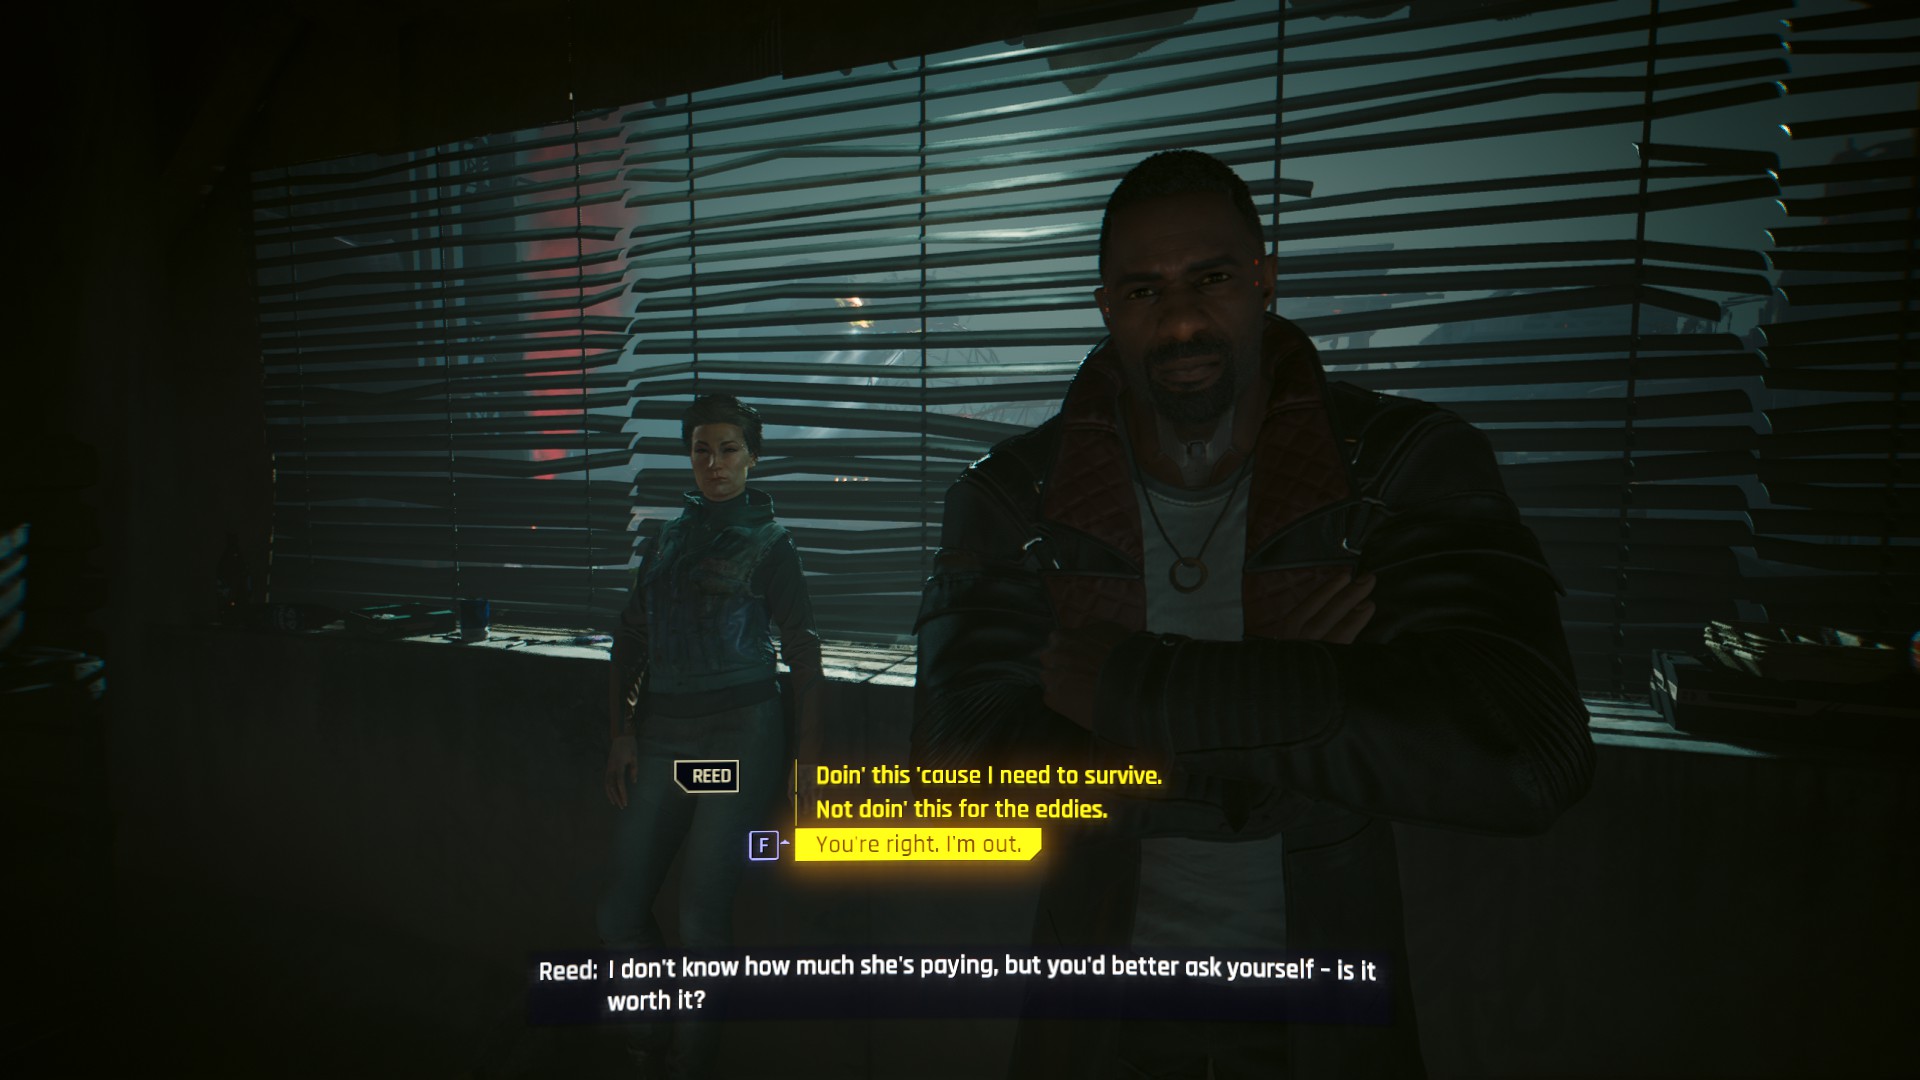 An image of two characters in a shaded room from Cyberpunk 2077, staring intently at the player, who is asked to make a difficult choice.